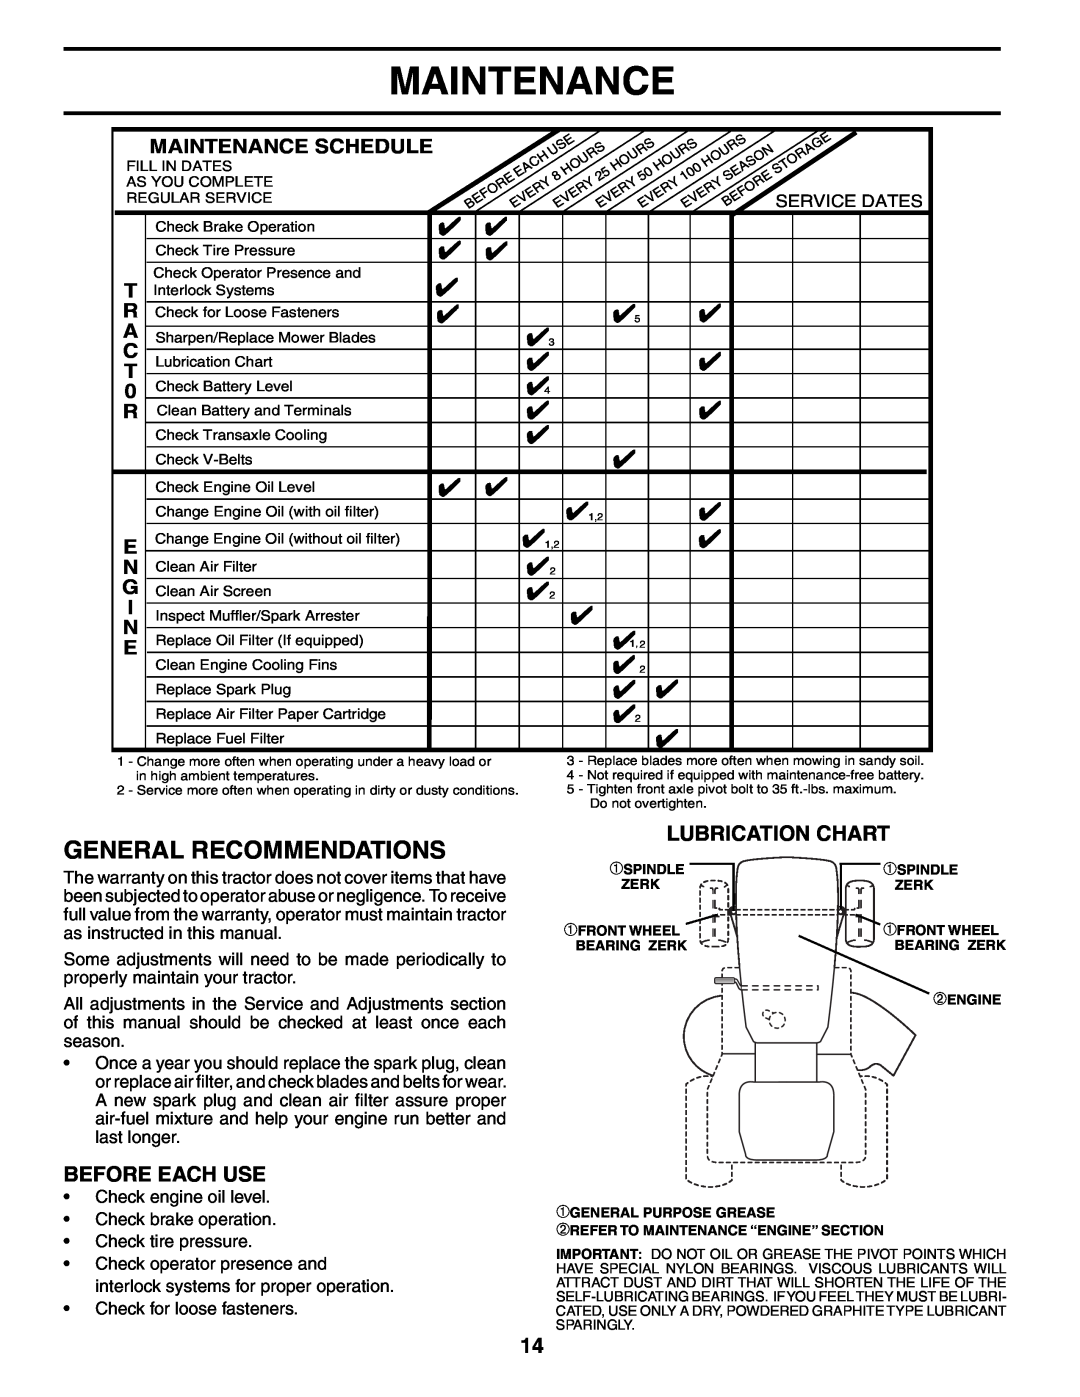 Poulan 954570932, 186888 manual General Recommendations, Lubrication Chart, Before Each Use, Maintenance Schedule 